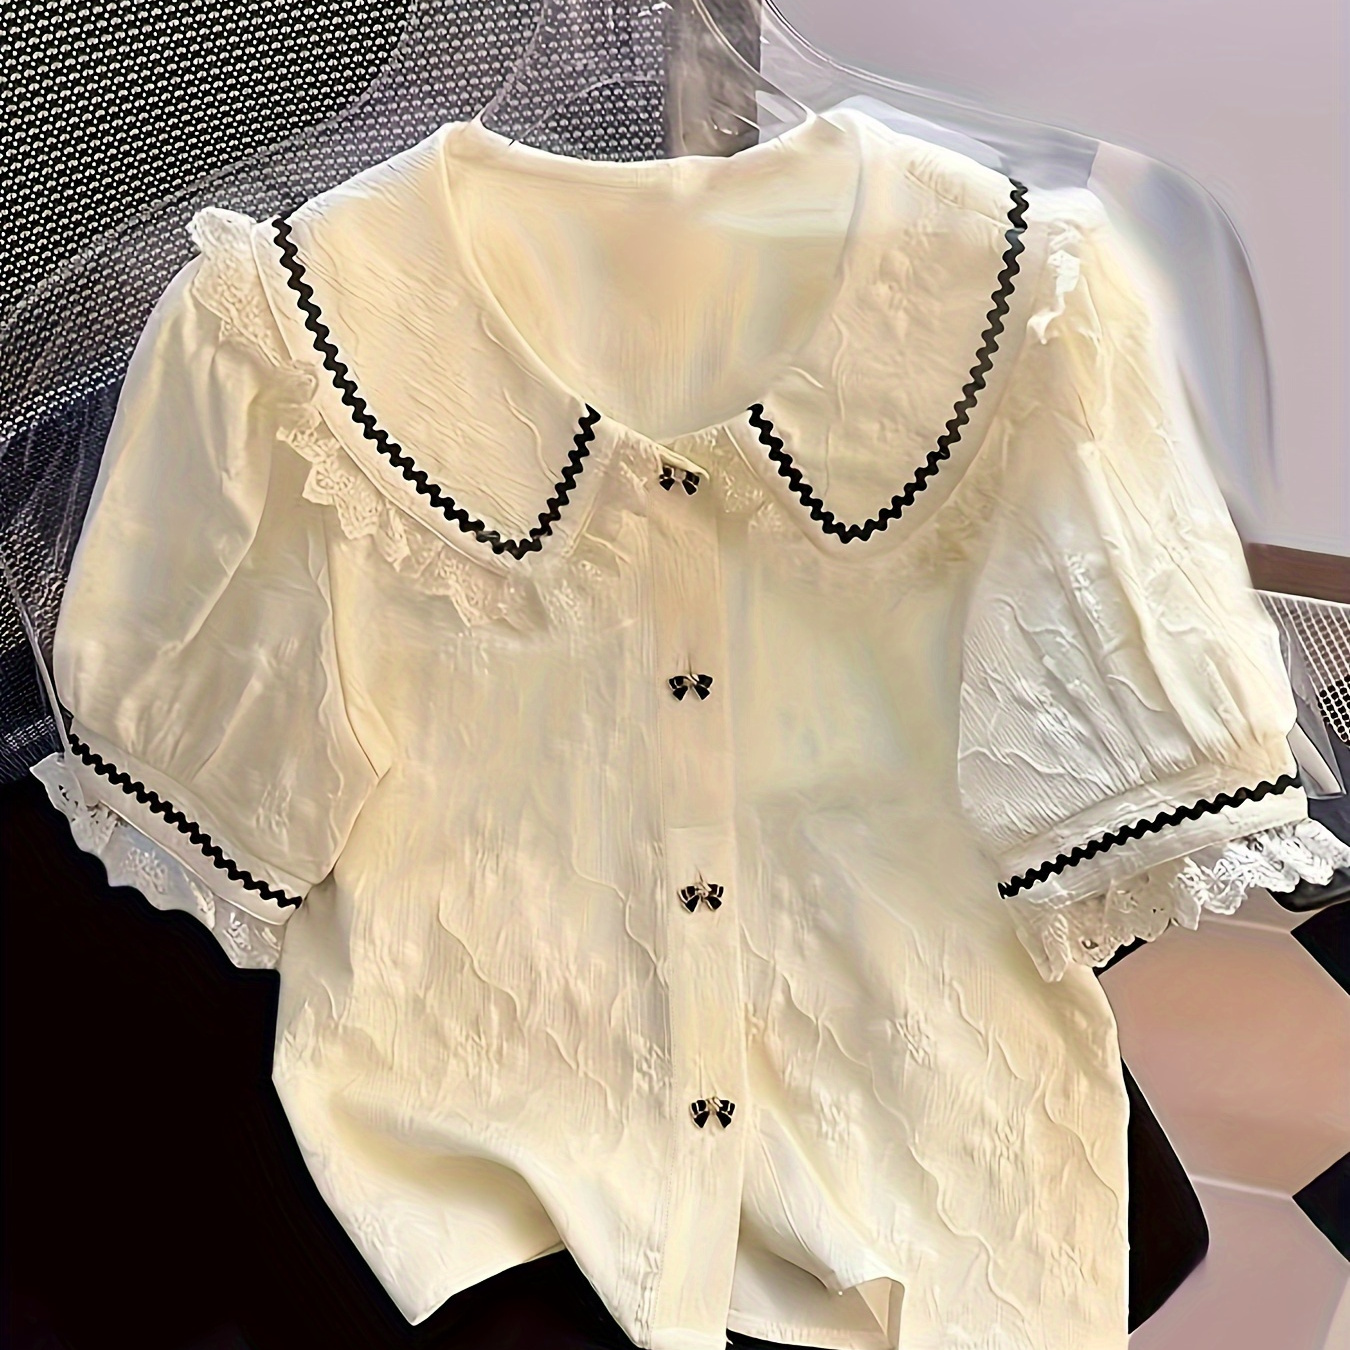 

Colorblock Contrast Lace Bowknot Button Blouse, Cute Doll Collar Puff Short Sleeve Blouse, Women's Clothing